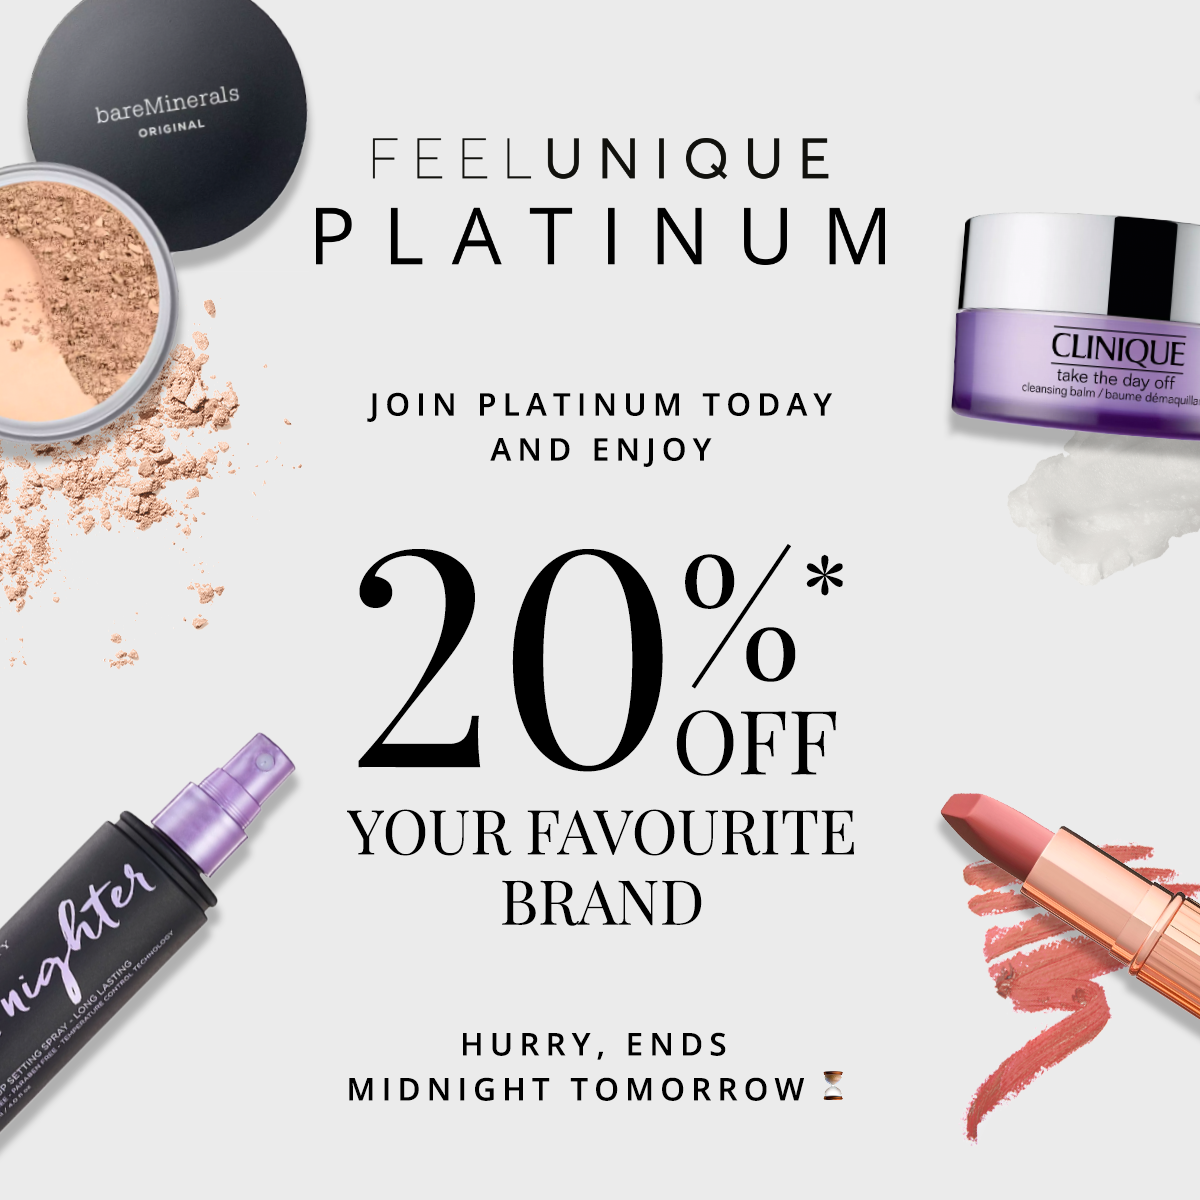 20% OFF YOUR FAVOURITE BRAND UNTIL MIDNIGHT TOMORROW